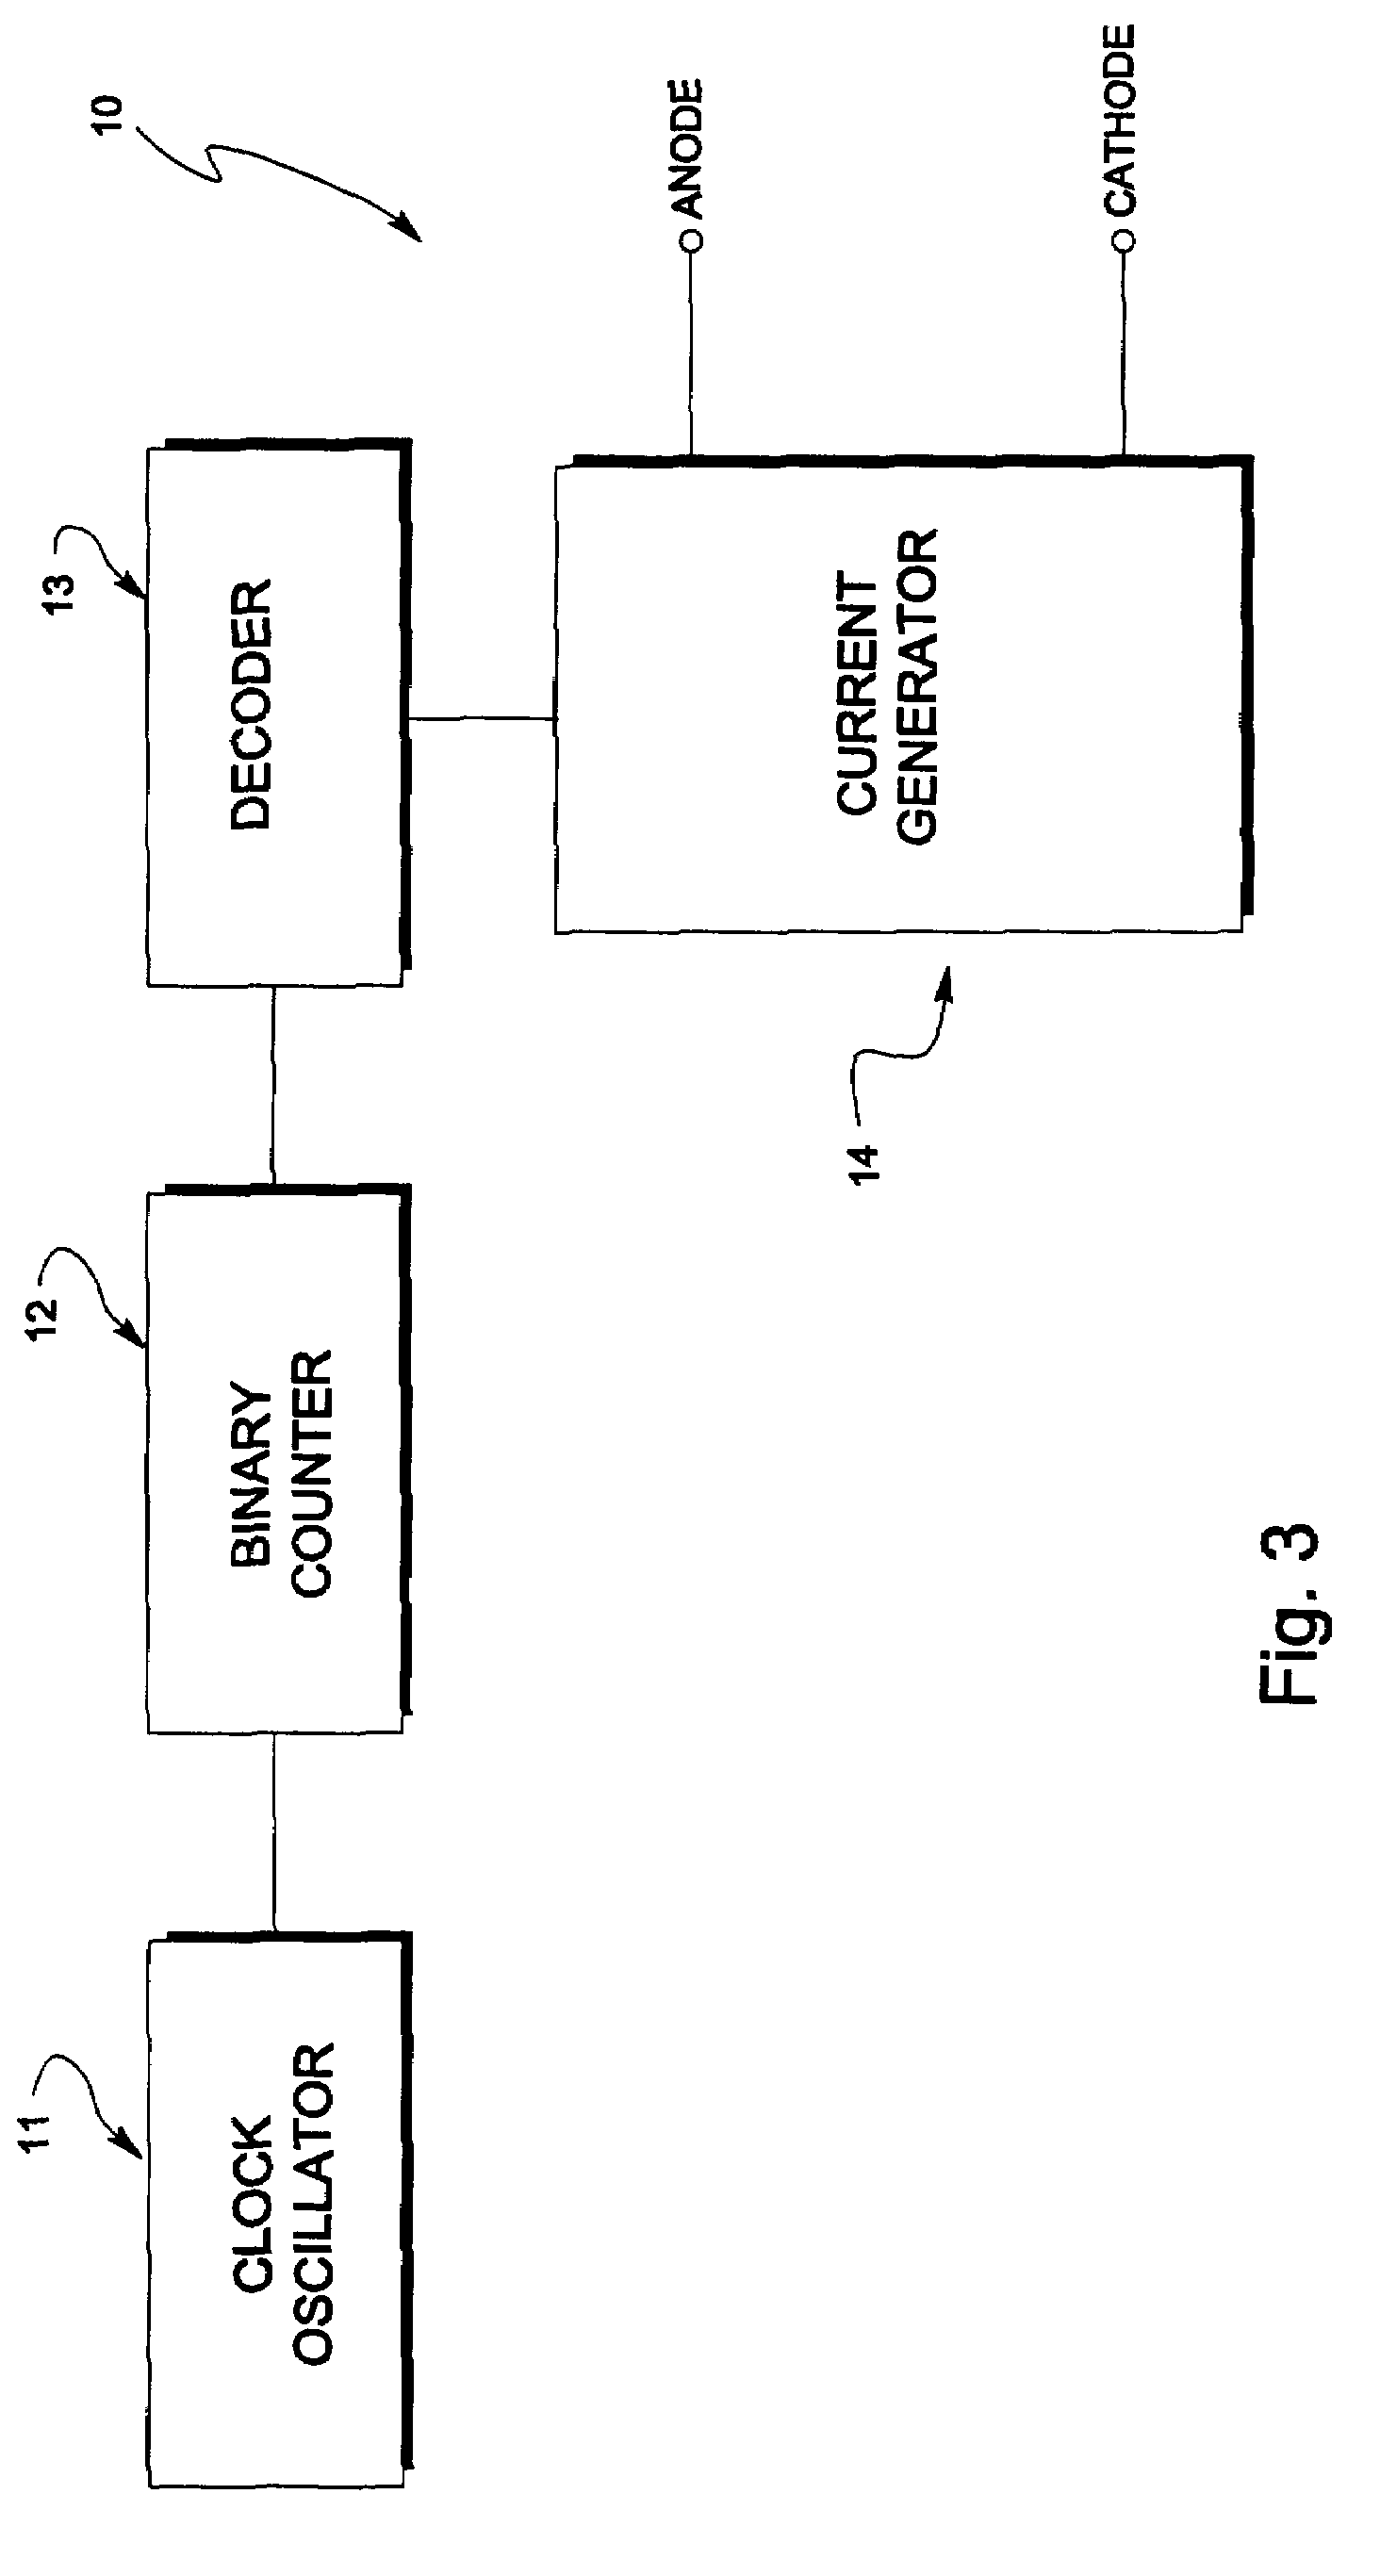 Apparatus for electrolysis of water